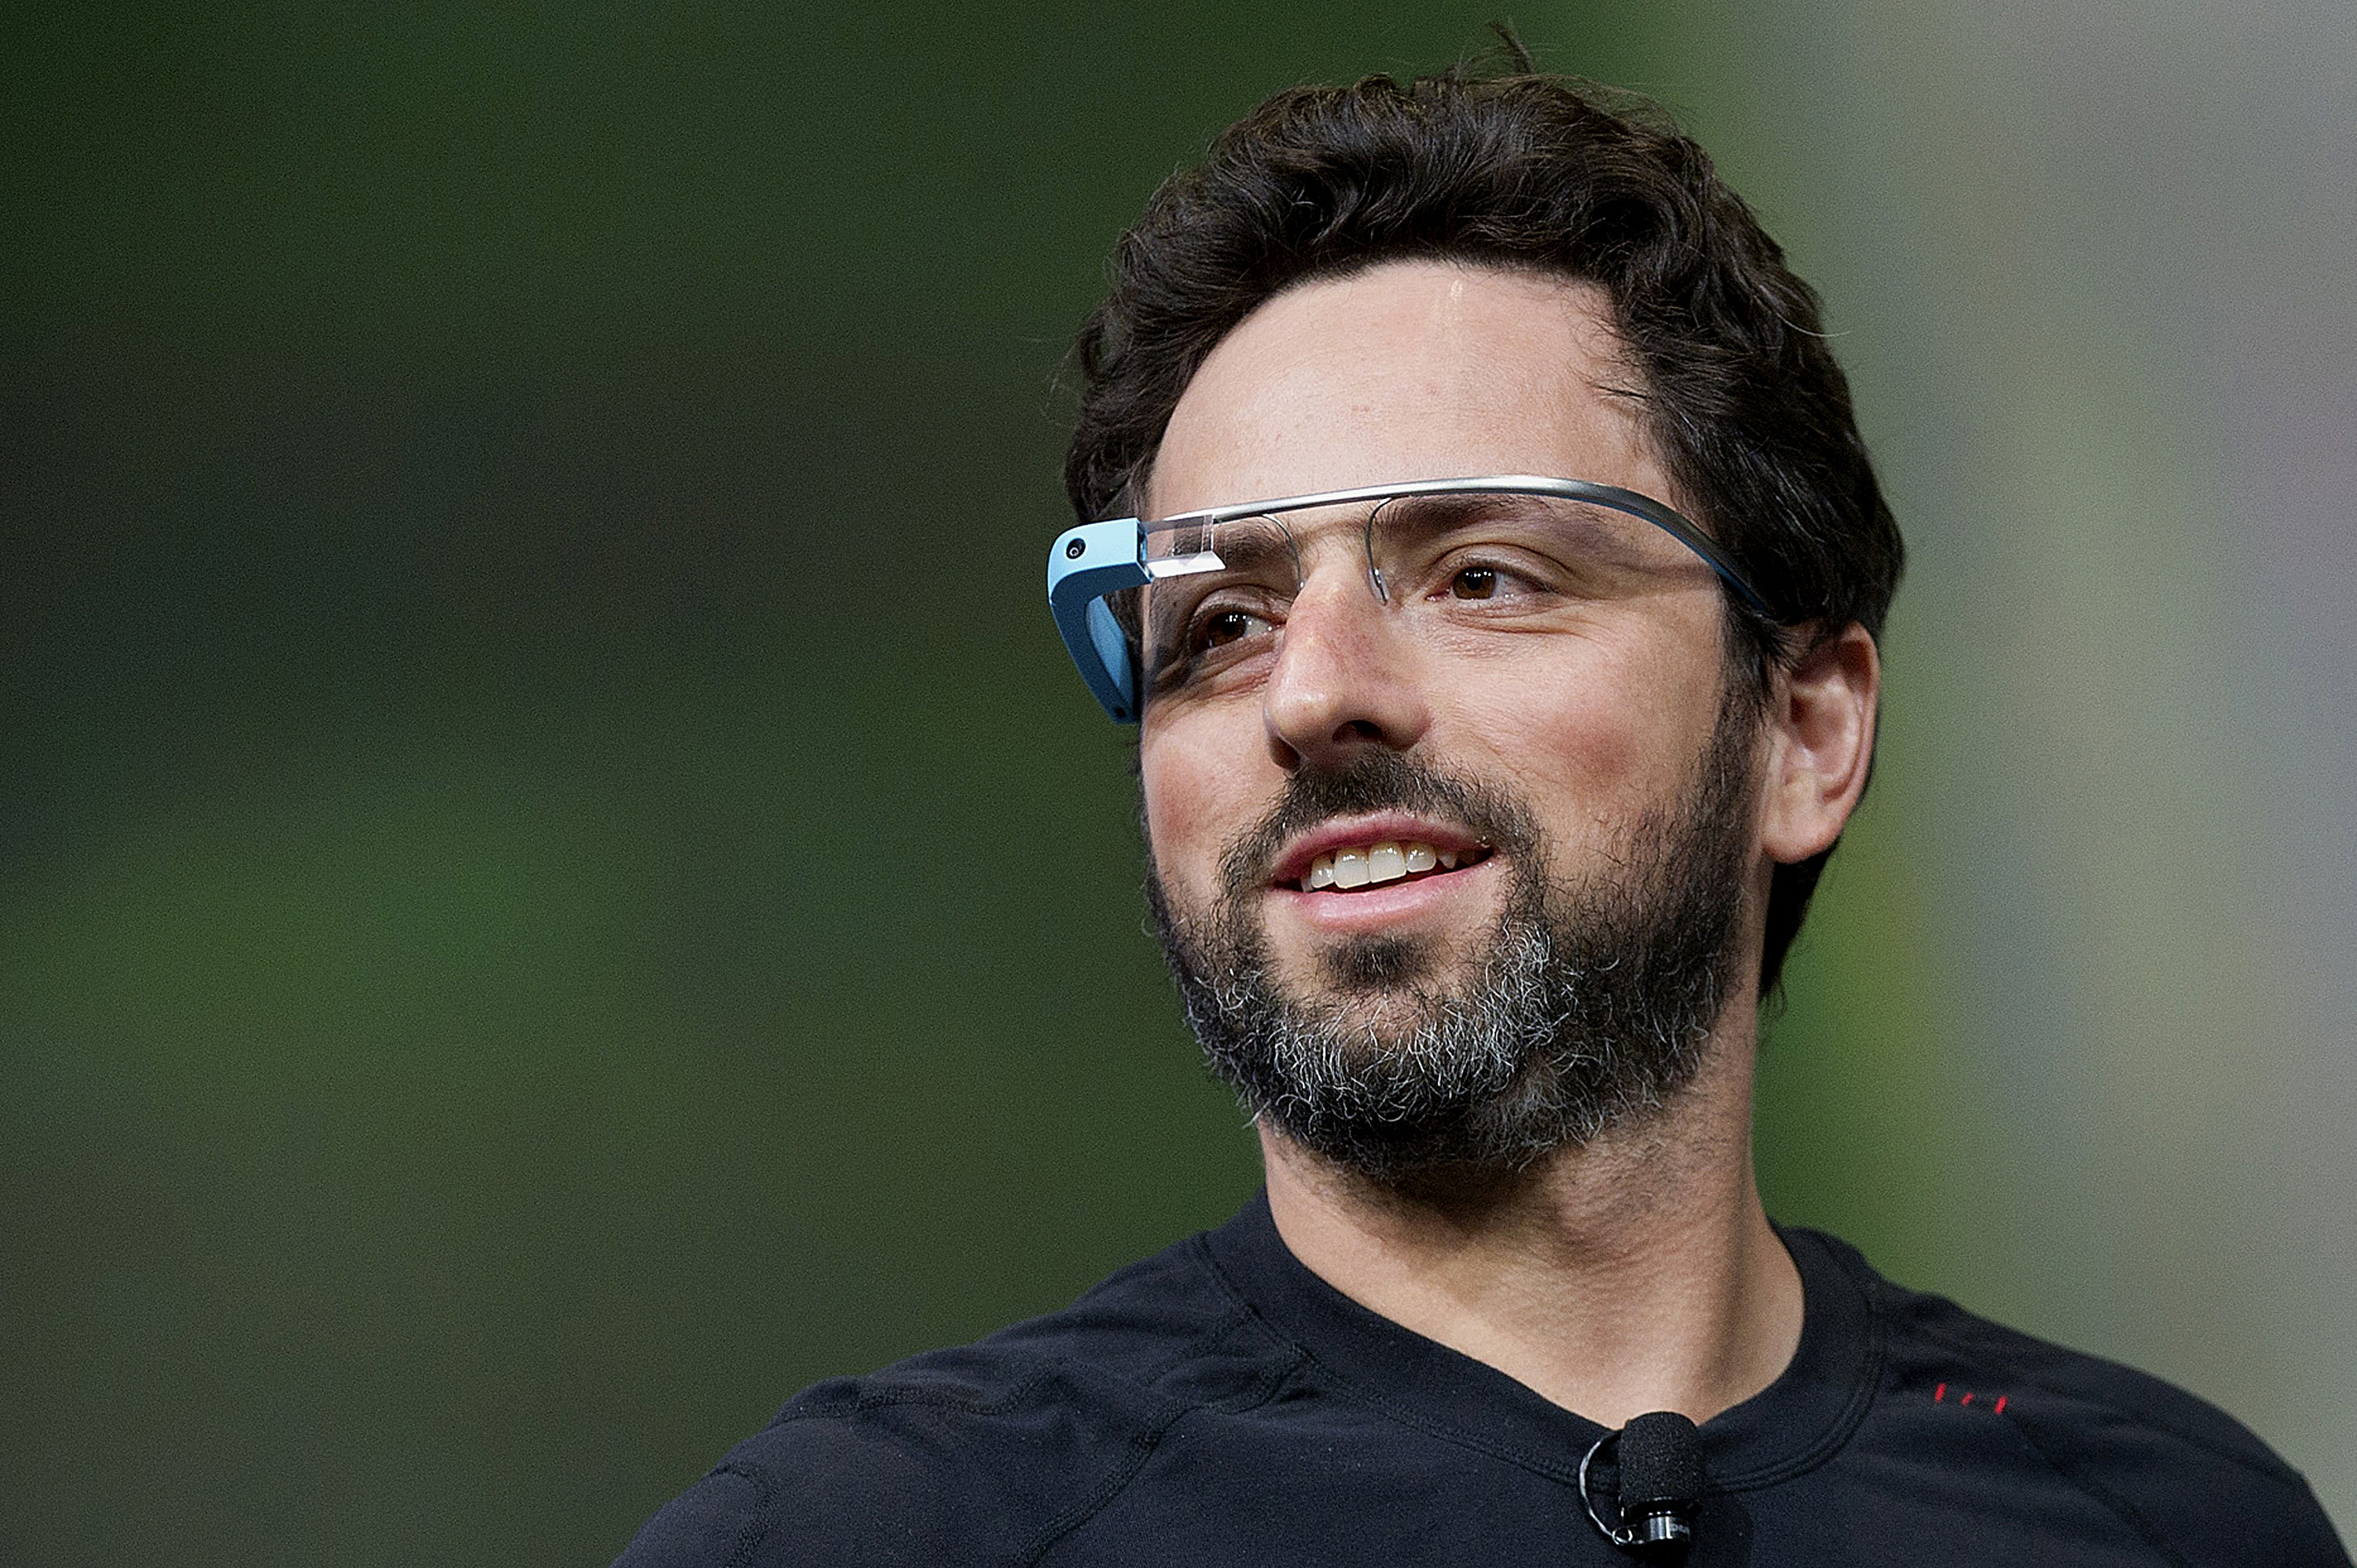 Key Speakers And General Views From The Google I/O 2012 Conference